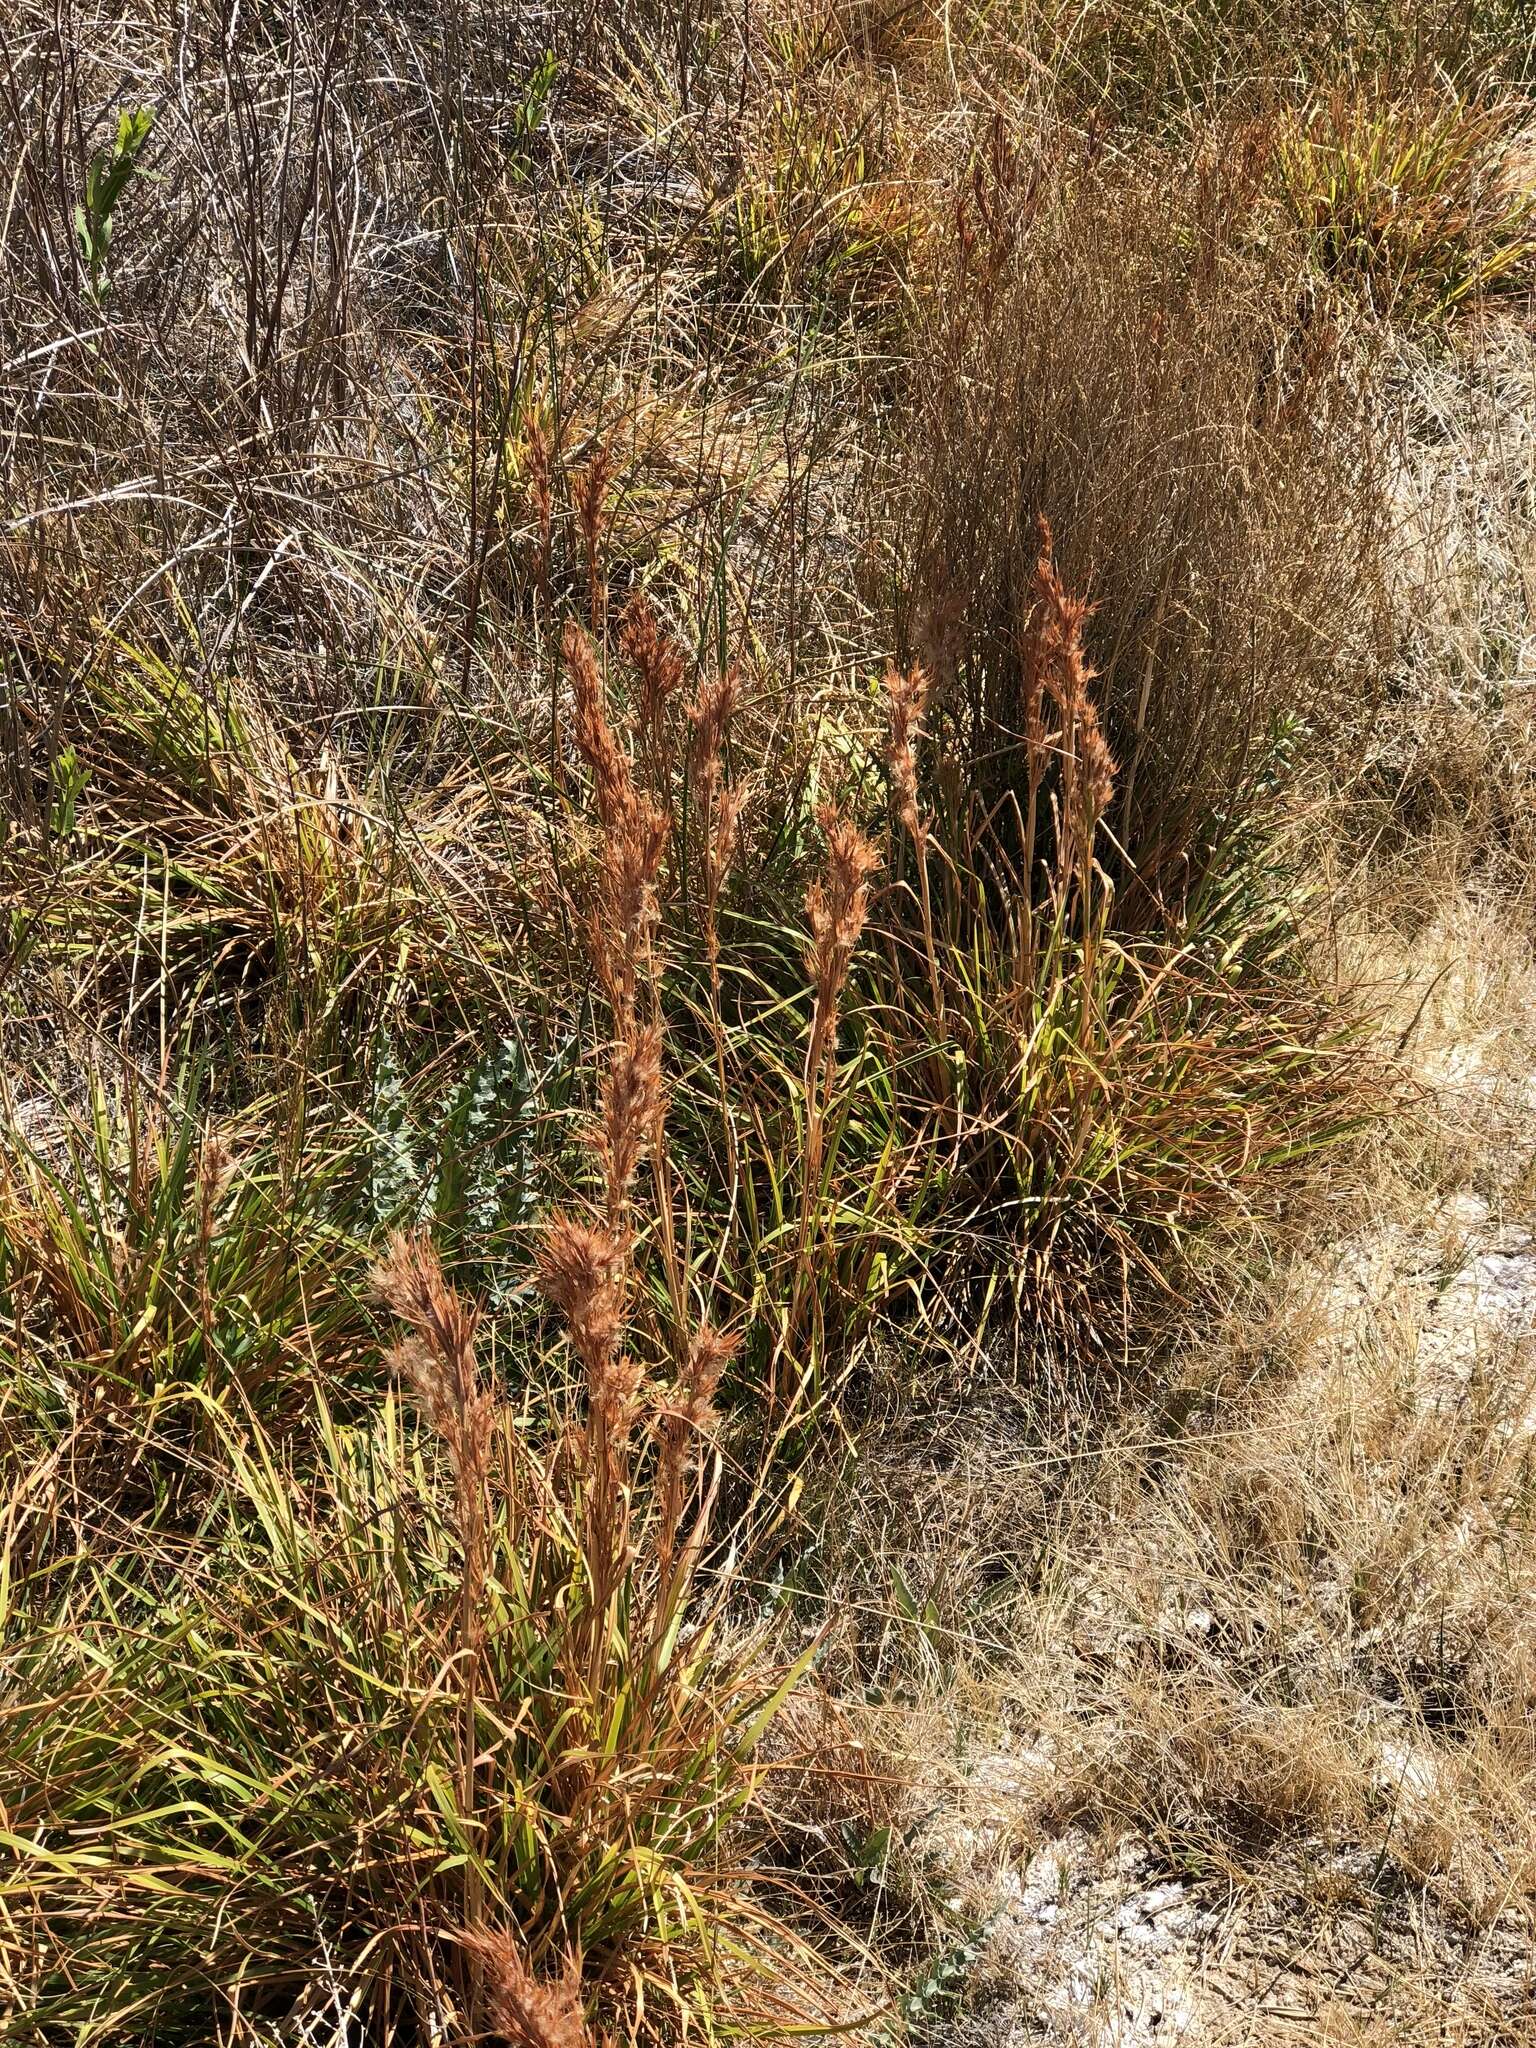 Image of Andropogon eremicus